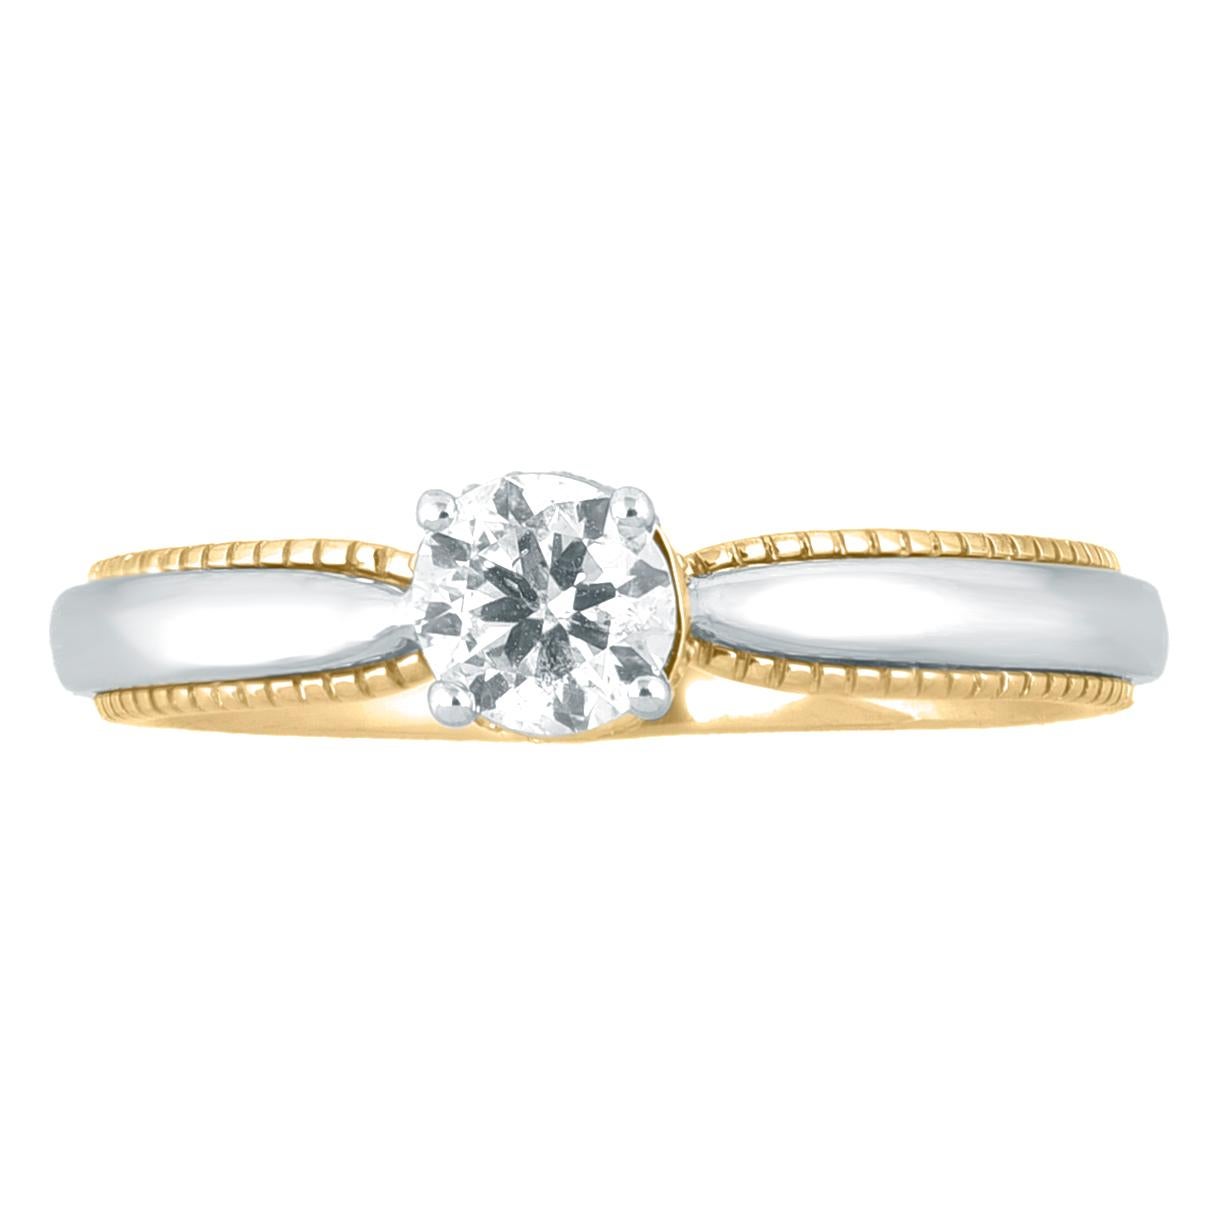 This classic engagement ring is studded with single cut & brilliant cut 21 diamond in pave and prong setting. This ring is designed in 18-karat two-tone gold. The diamonds are graded H-I Color, I-2 Clarity.